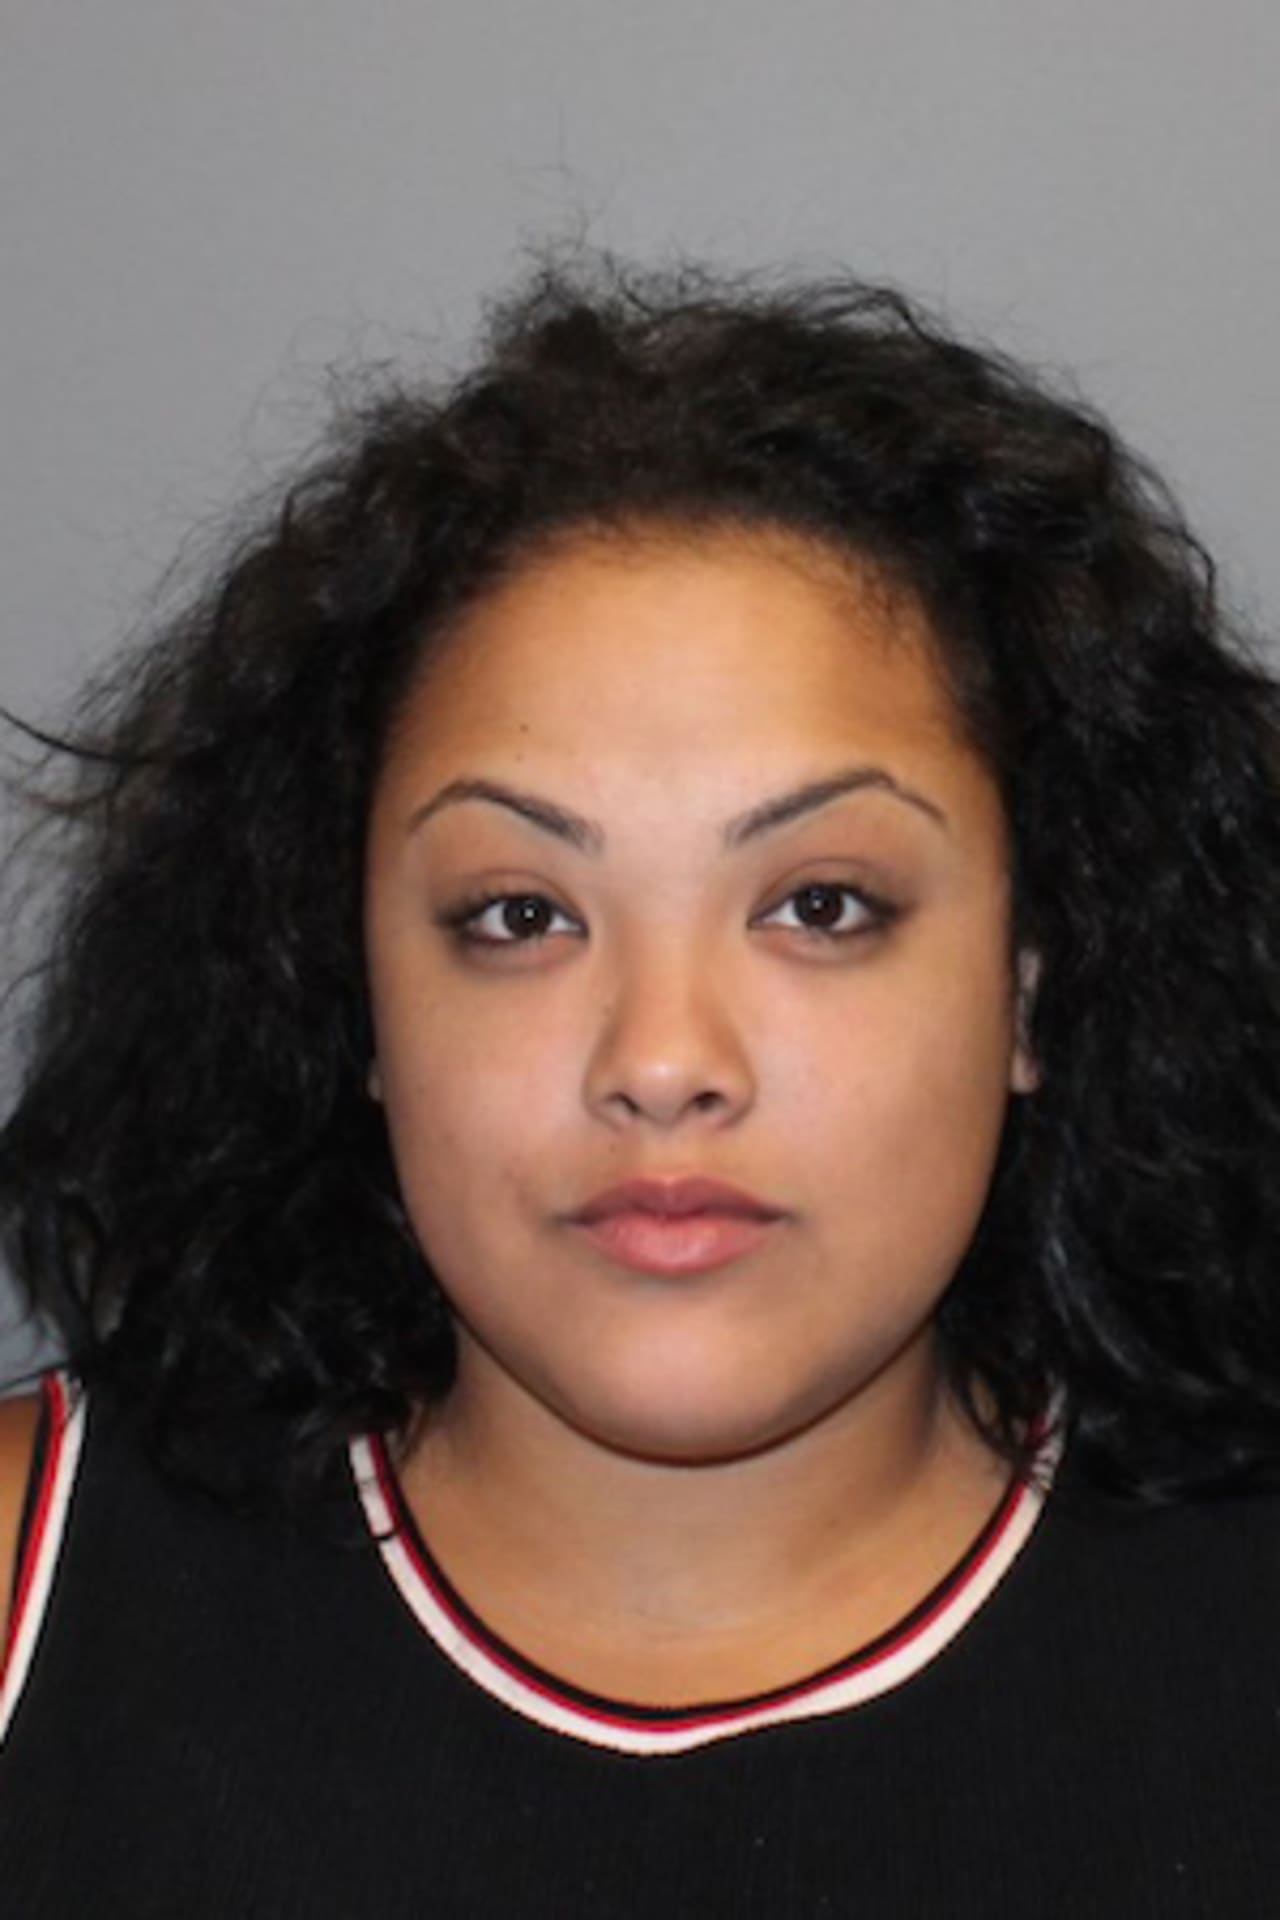 Ashely Aponte, 21, of Norwalk was charged with throwing a bottle at a car and kicking an officer.